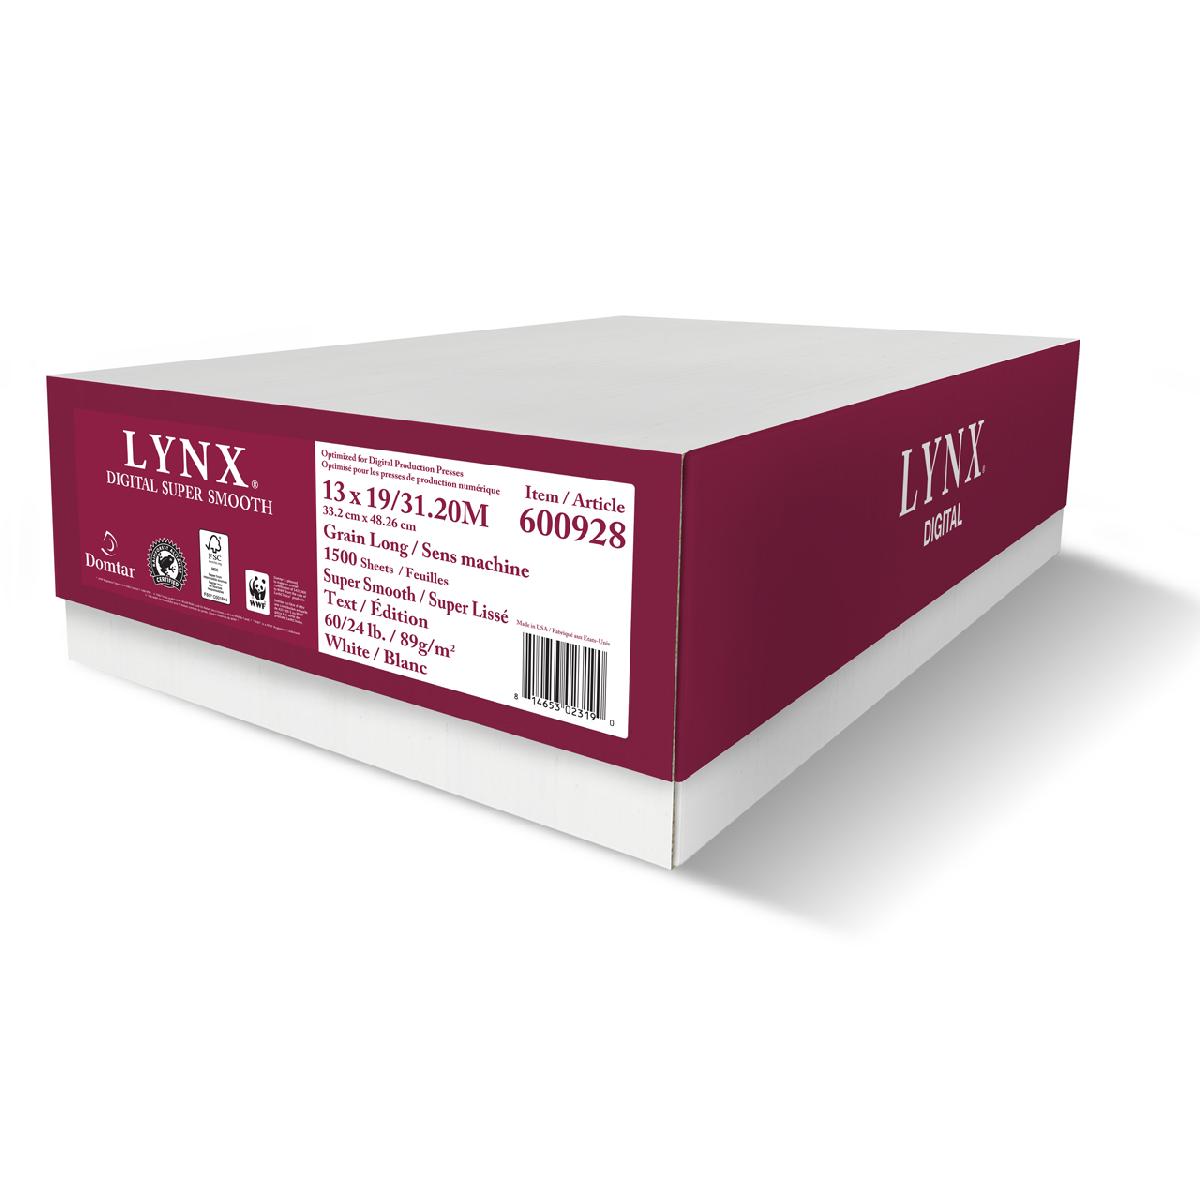 Domtar® Lynx™ Digital White Smooth 80 lb. Cover 19x13 in. 500 Sheets per Carton